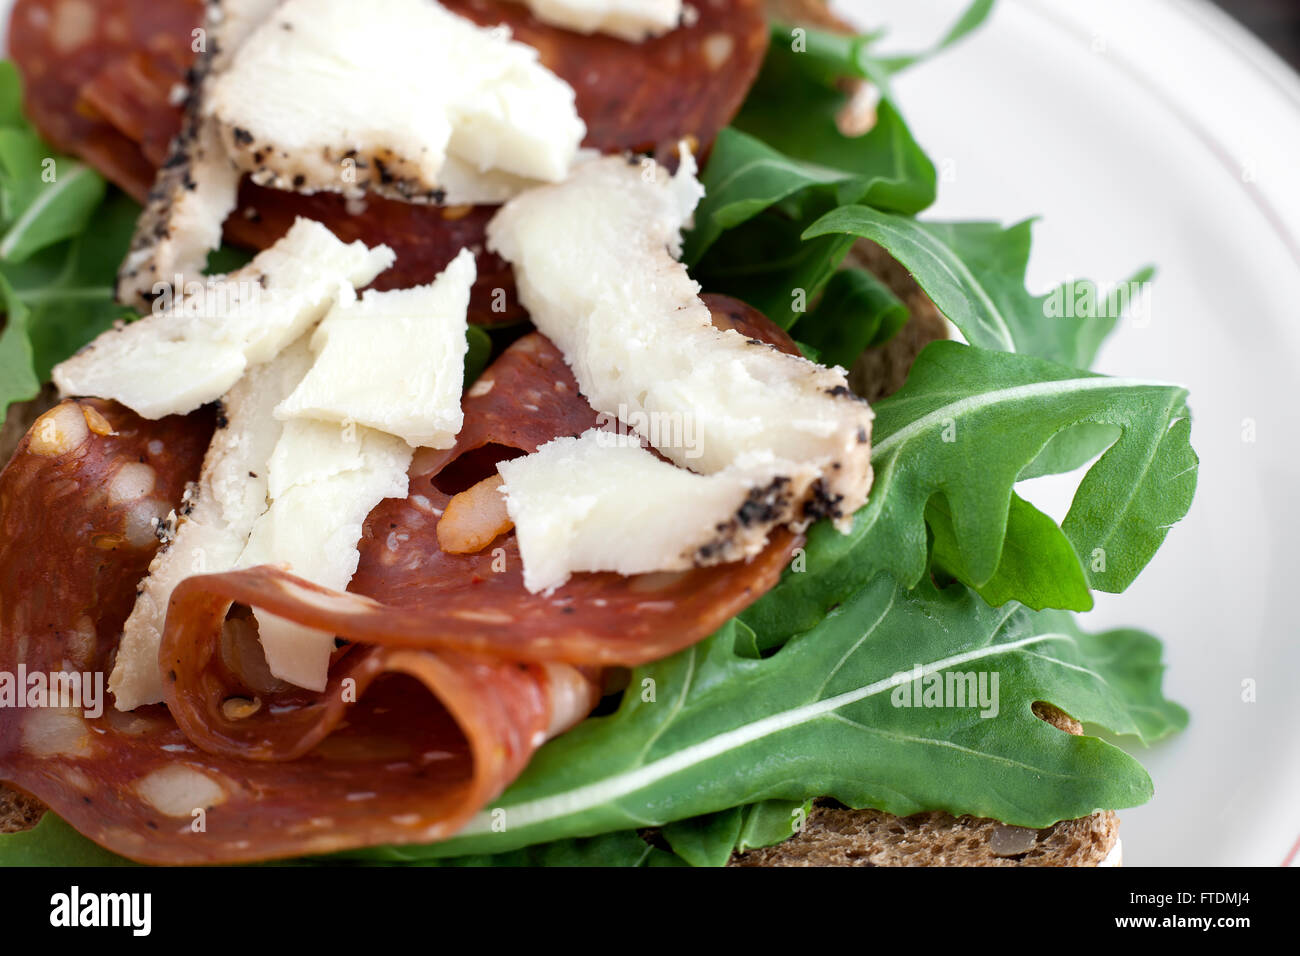 Salami sandwich with rucola, sheep cheese and brown bread. Stock Photo